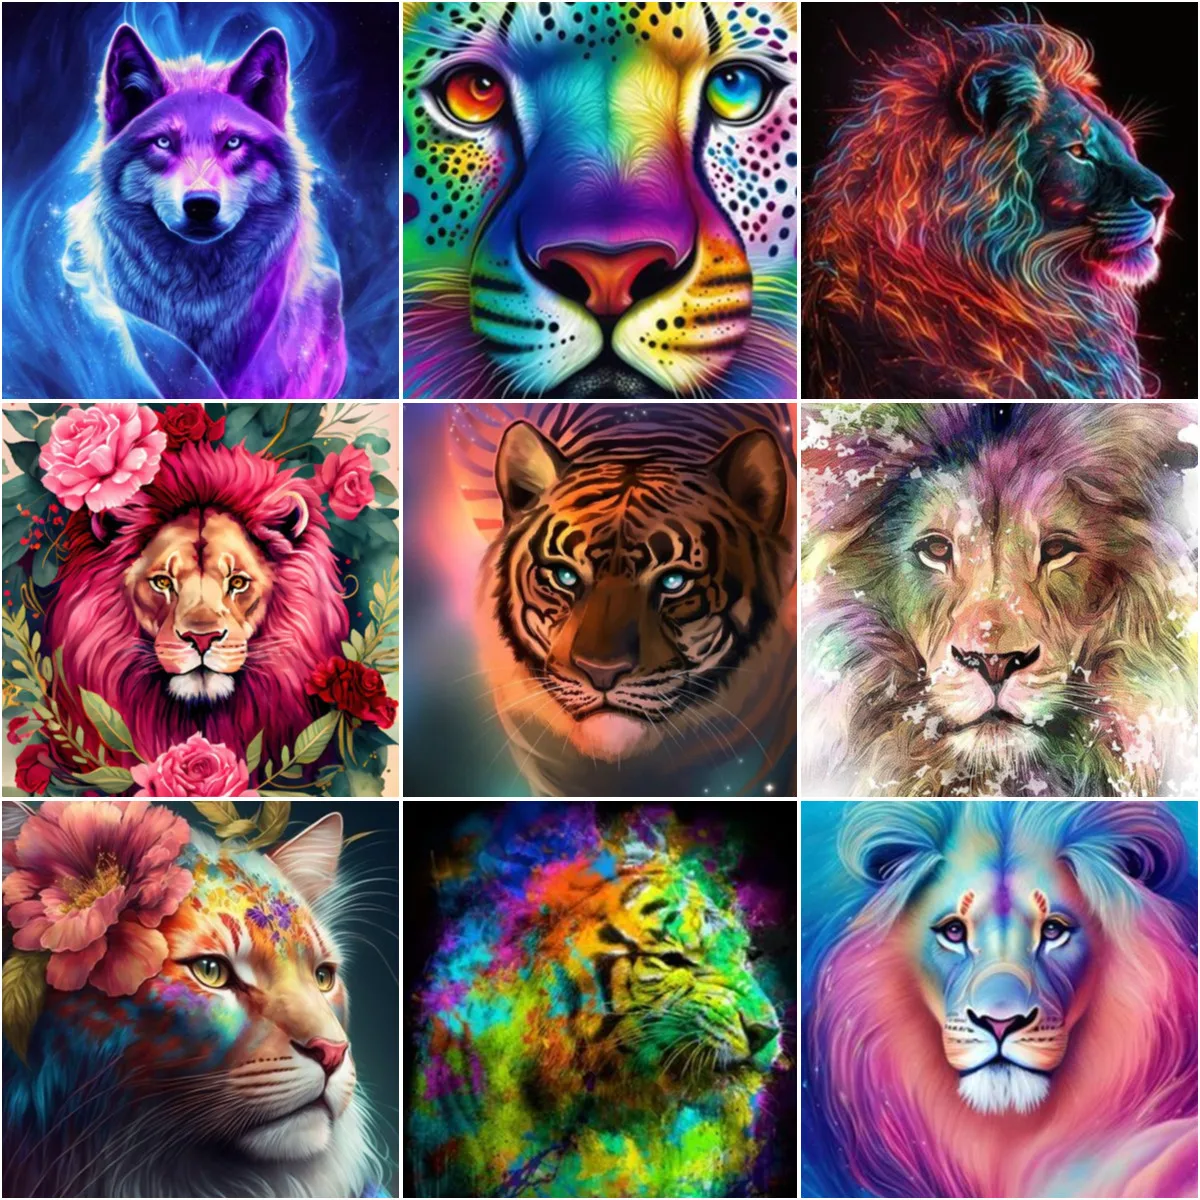 

Full Square/Round Mosaic Flower 5D DIY AB Diamond Painting Wild animal Diamont Embroidery tiger Cross Stitch Home Decor Gift